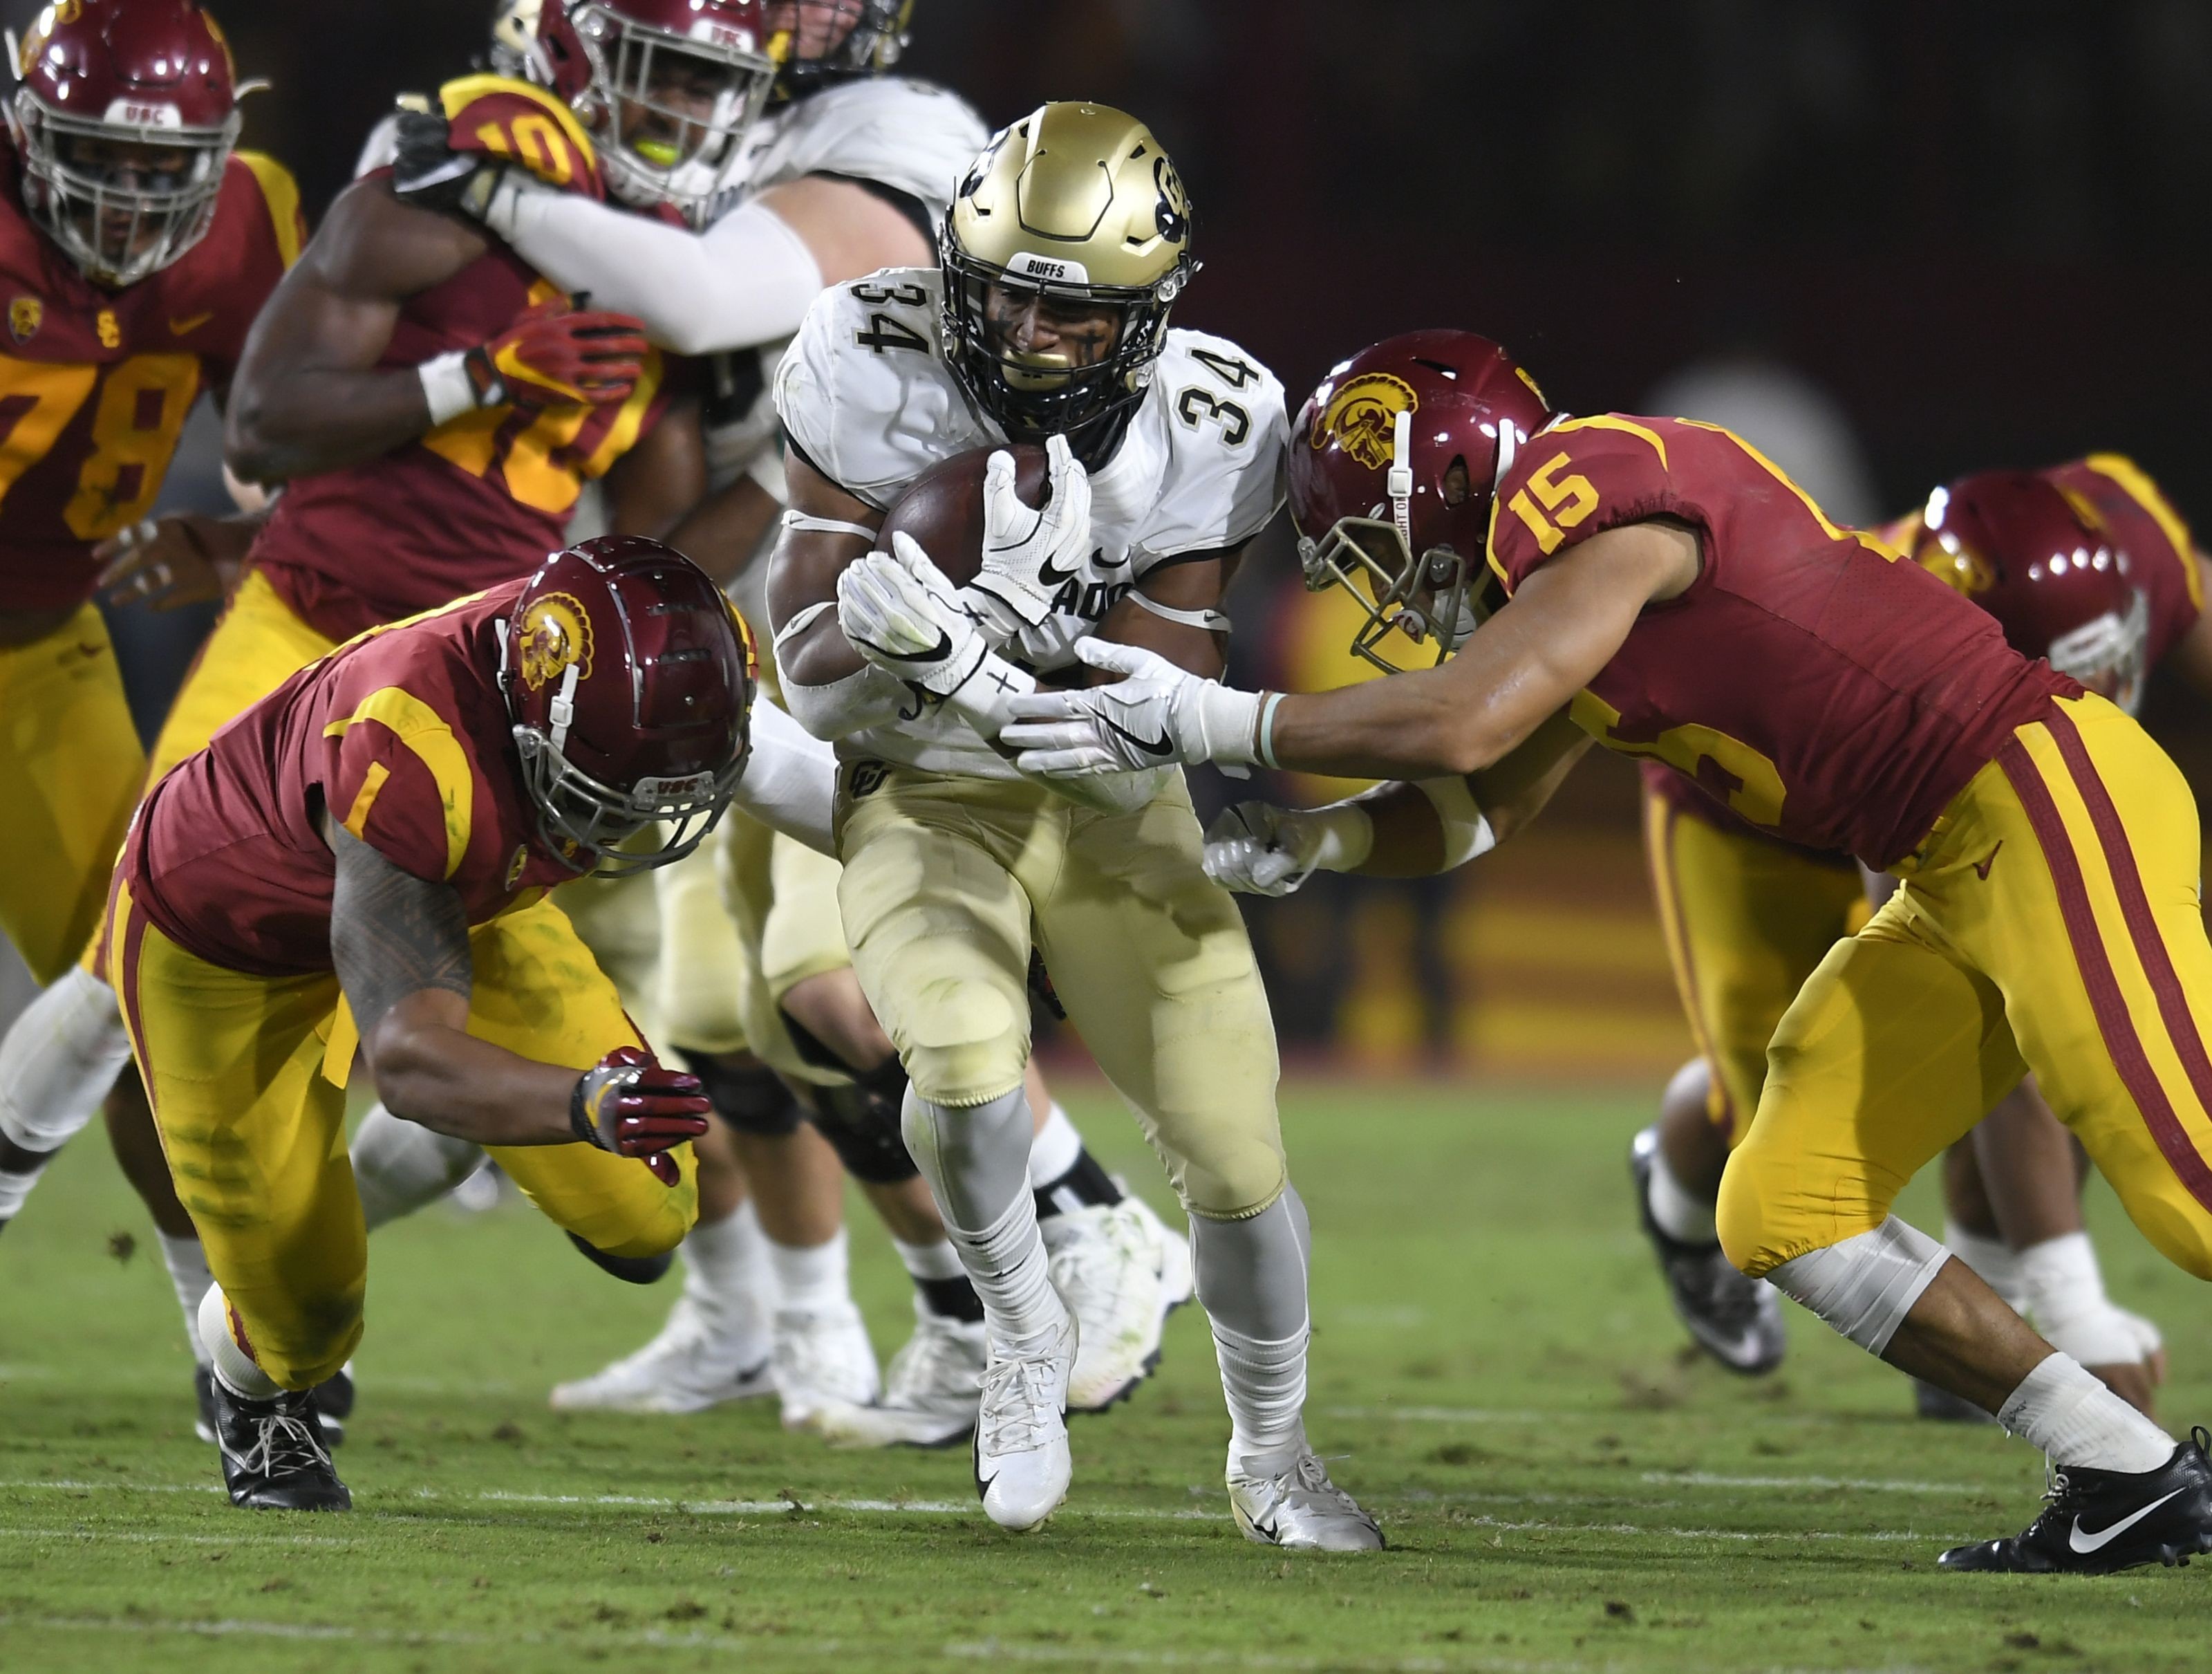 USC football: The good, the bad and what stood out vs. Colorado